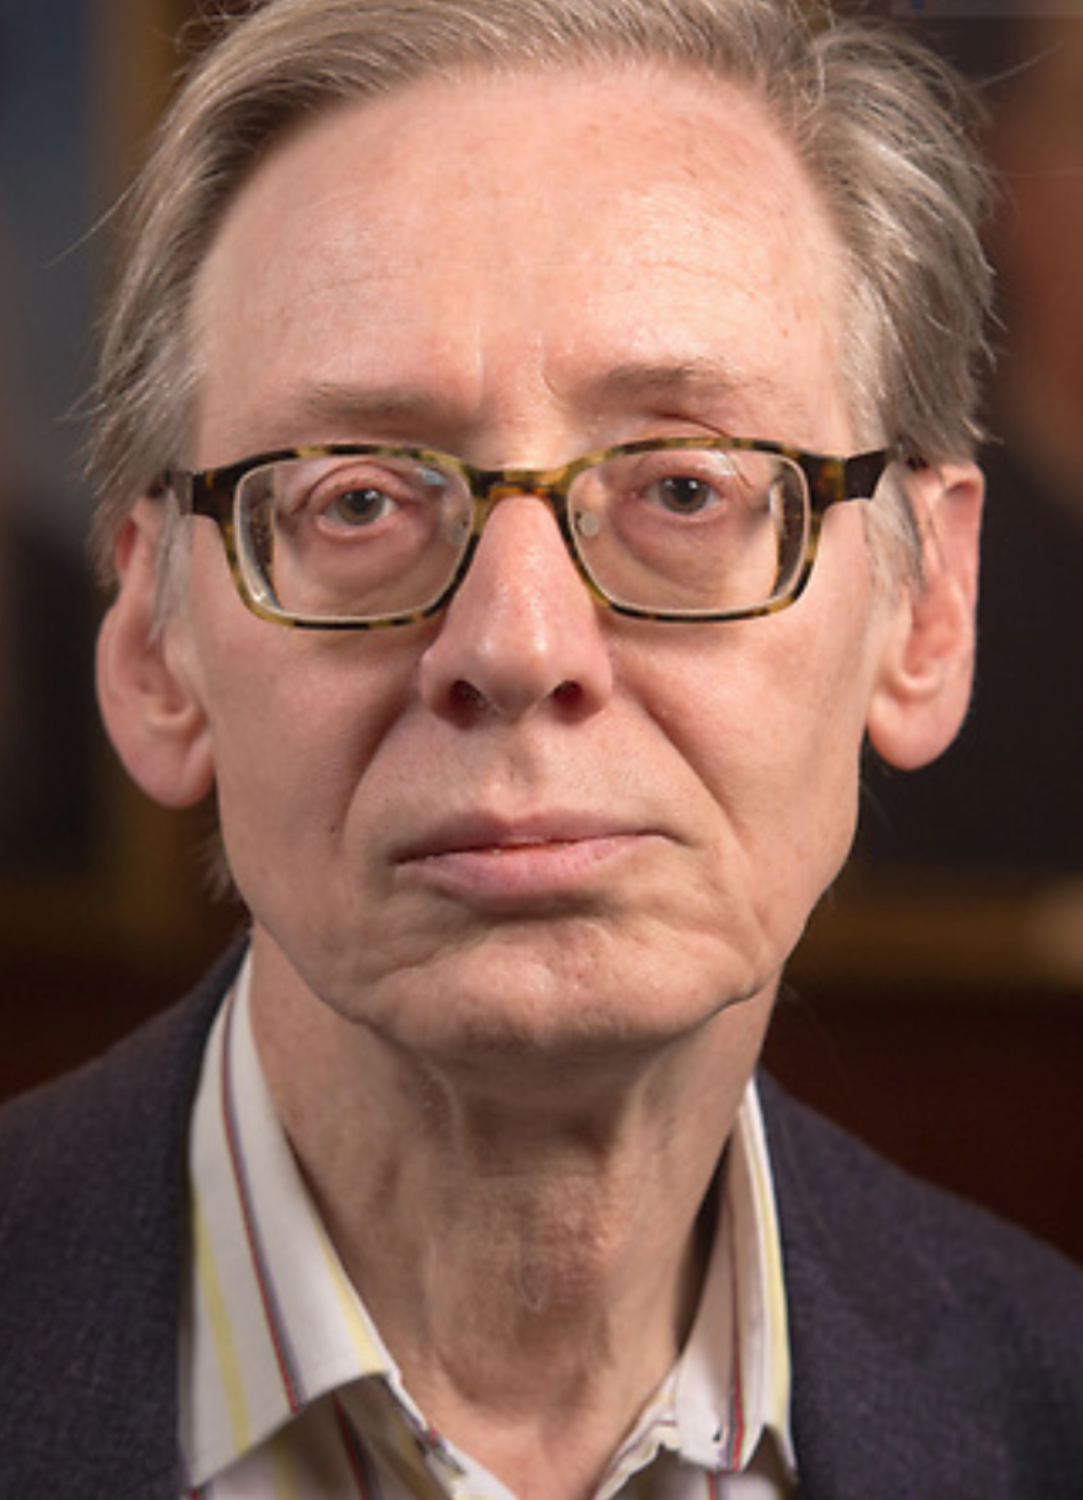 A close up image of Stephen Gersh looking into the camera while wearing glasses and a collared shirt and jacket.